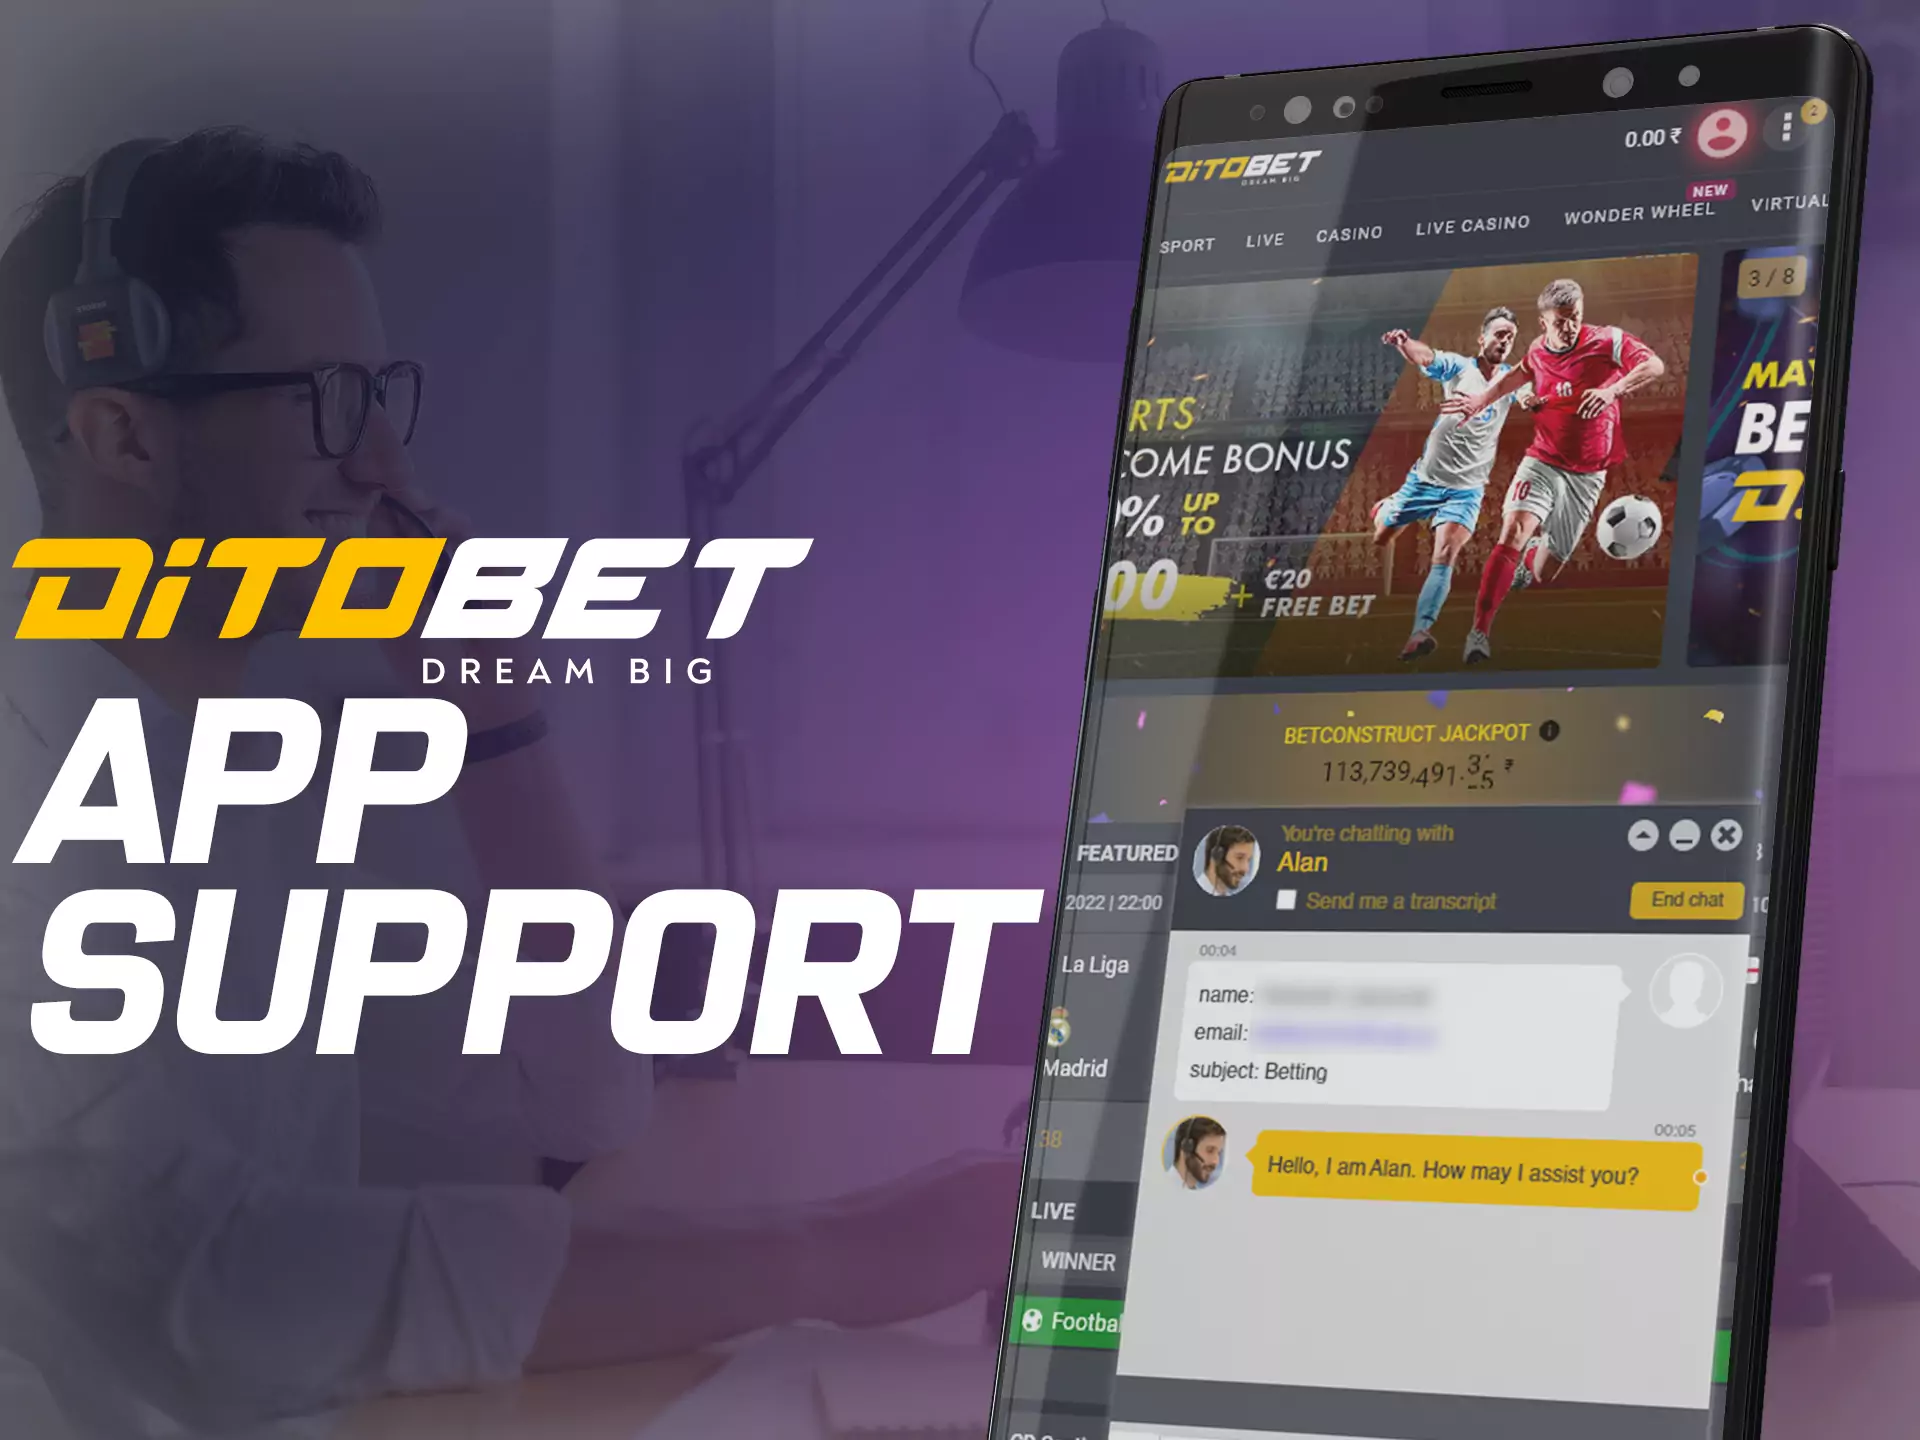 Ditobet support staff is ready to help you at any time.